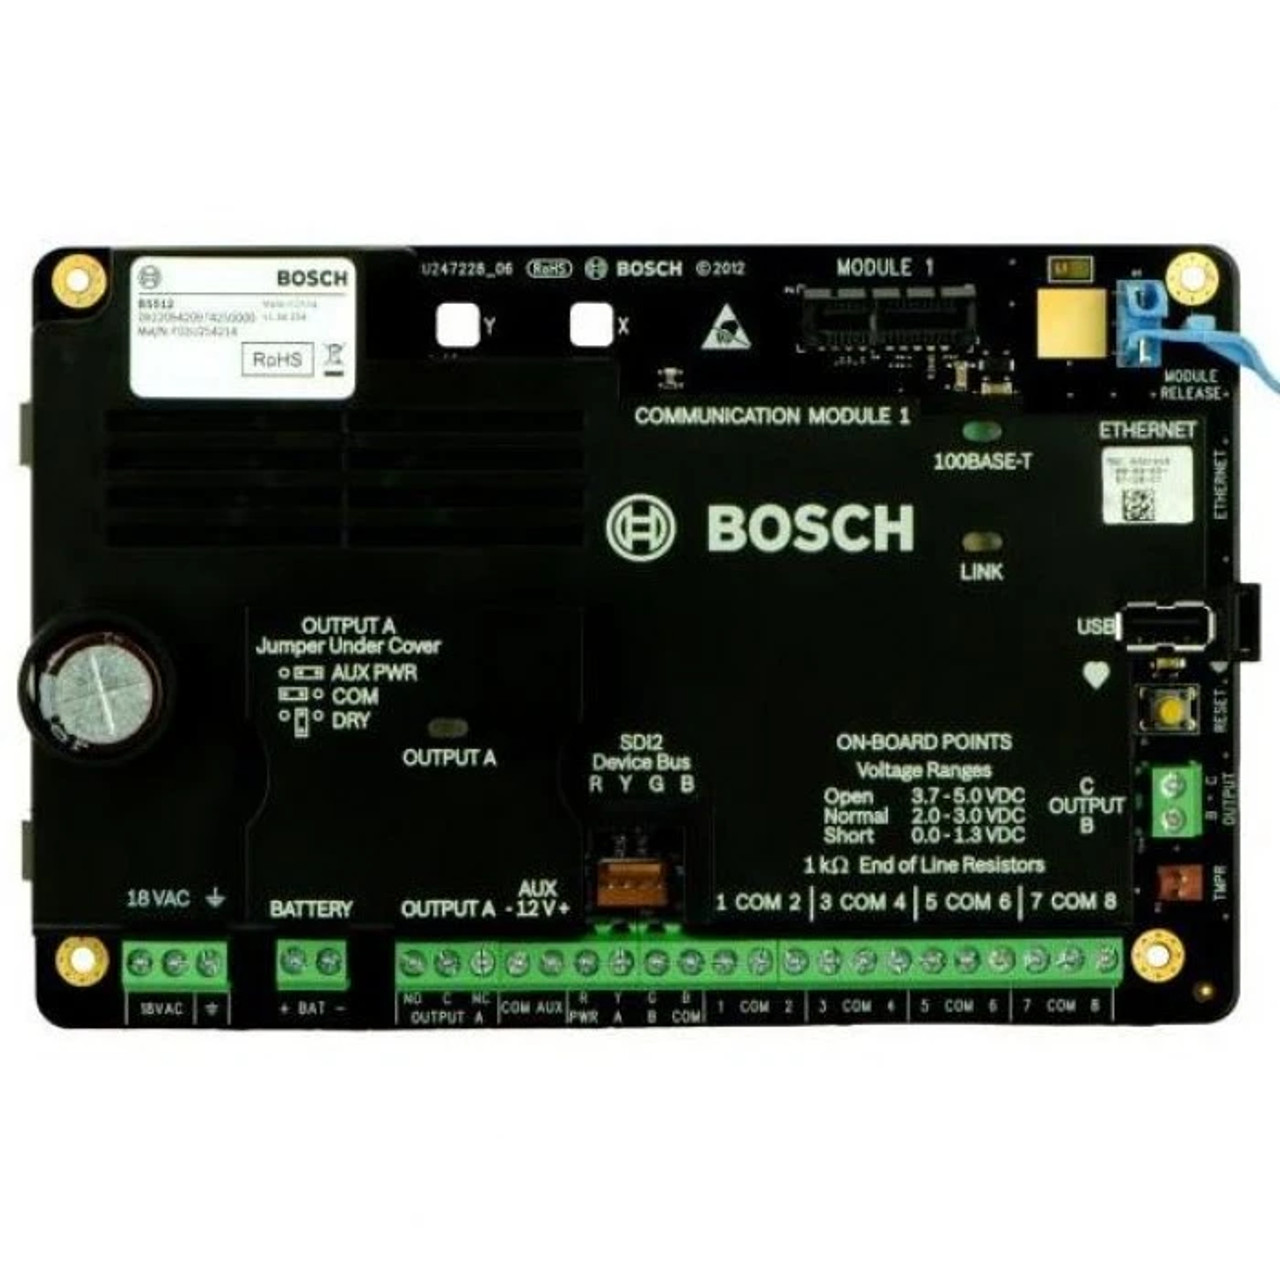 Bosch B4512-D 28 Points IP Control Panel Kit with Transformer and Small  Enclosure